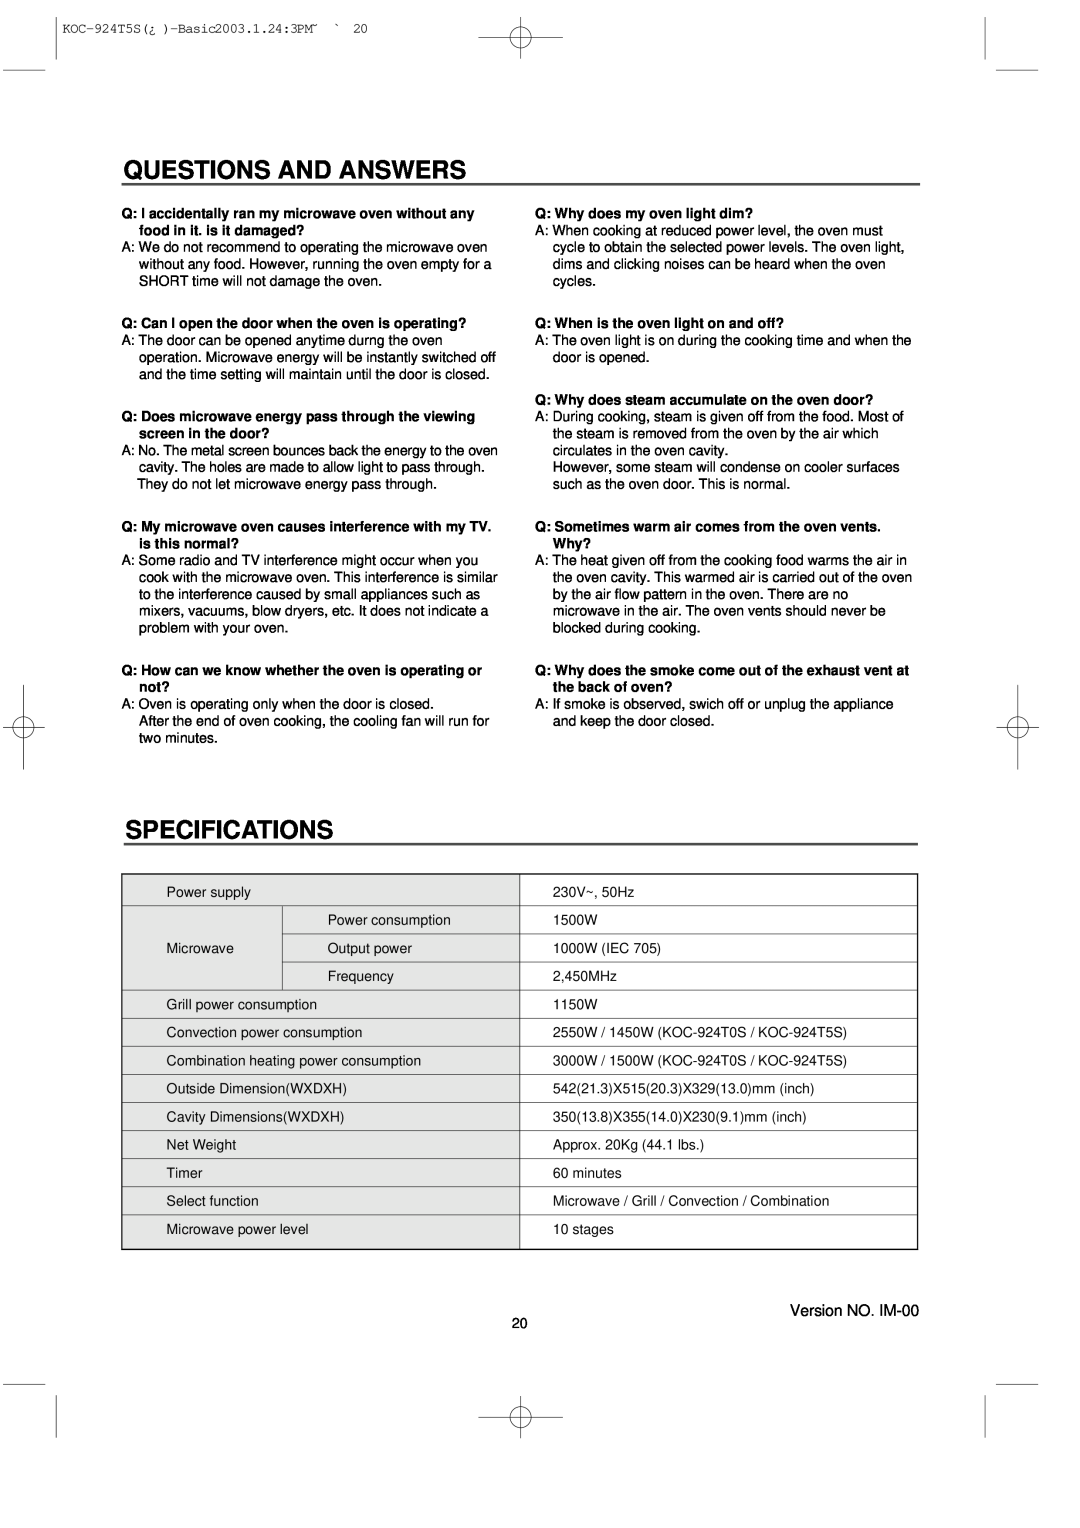 Daewoo KOC-924T5S, KOC-924T0S owner manual Questions And Answers, Specifications, Version NO. IM-00 